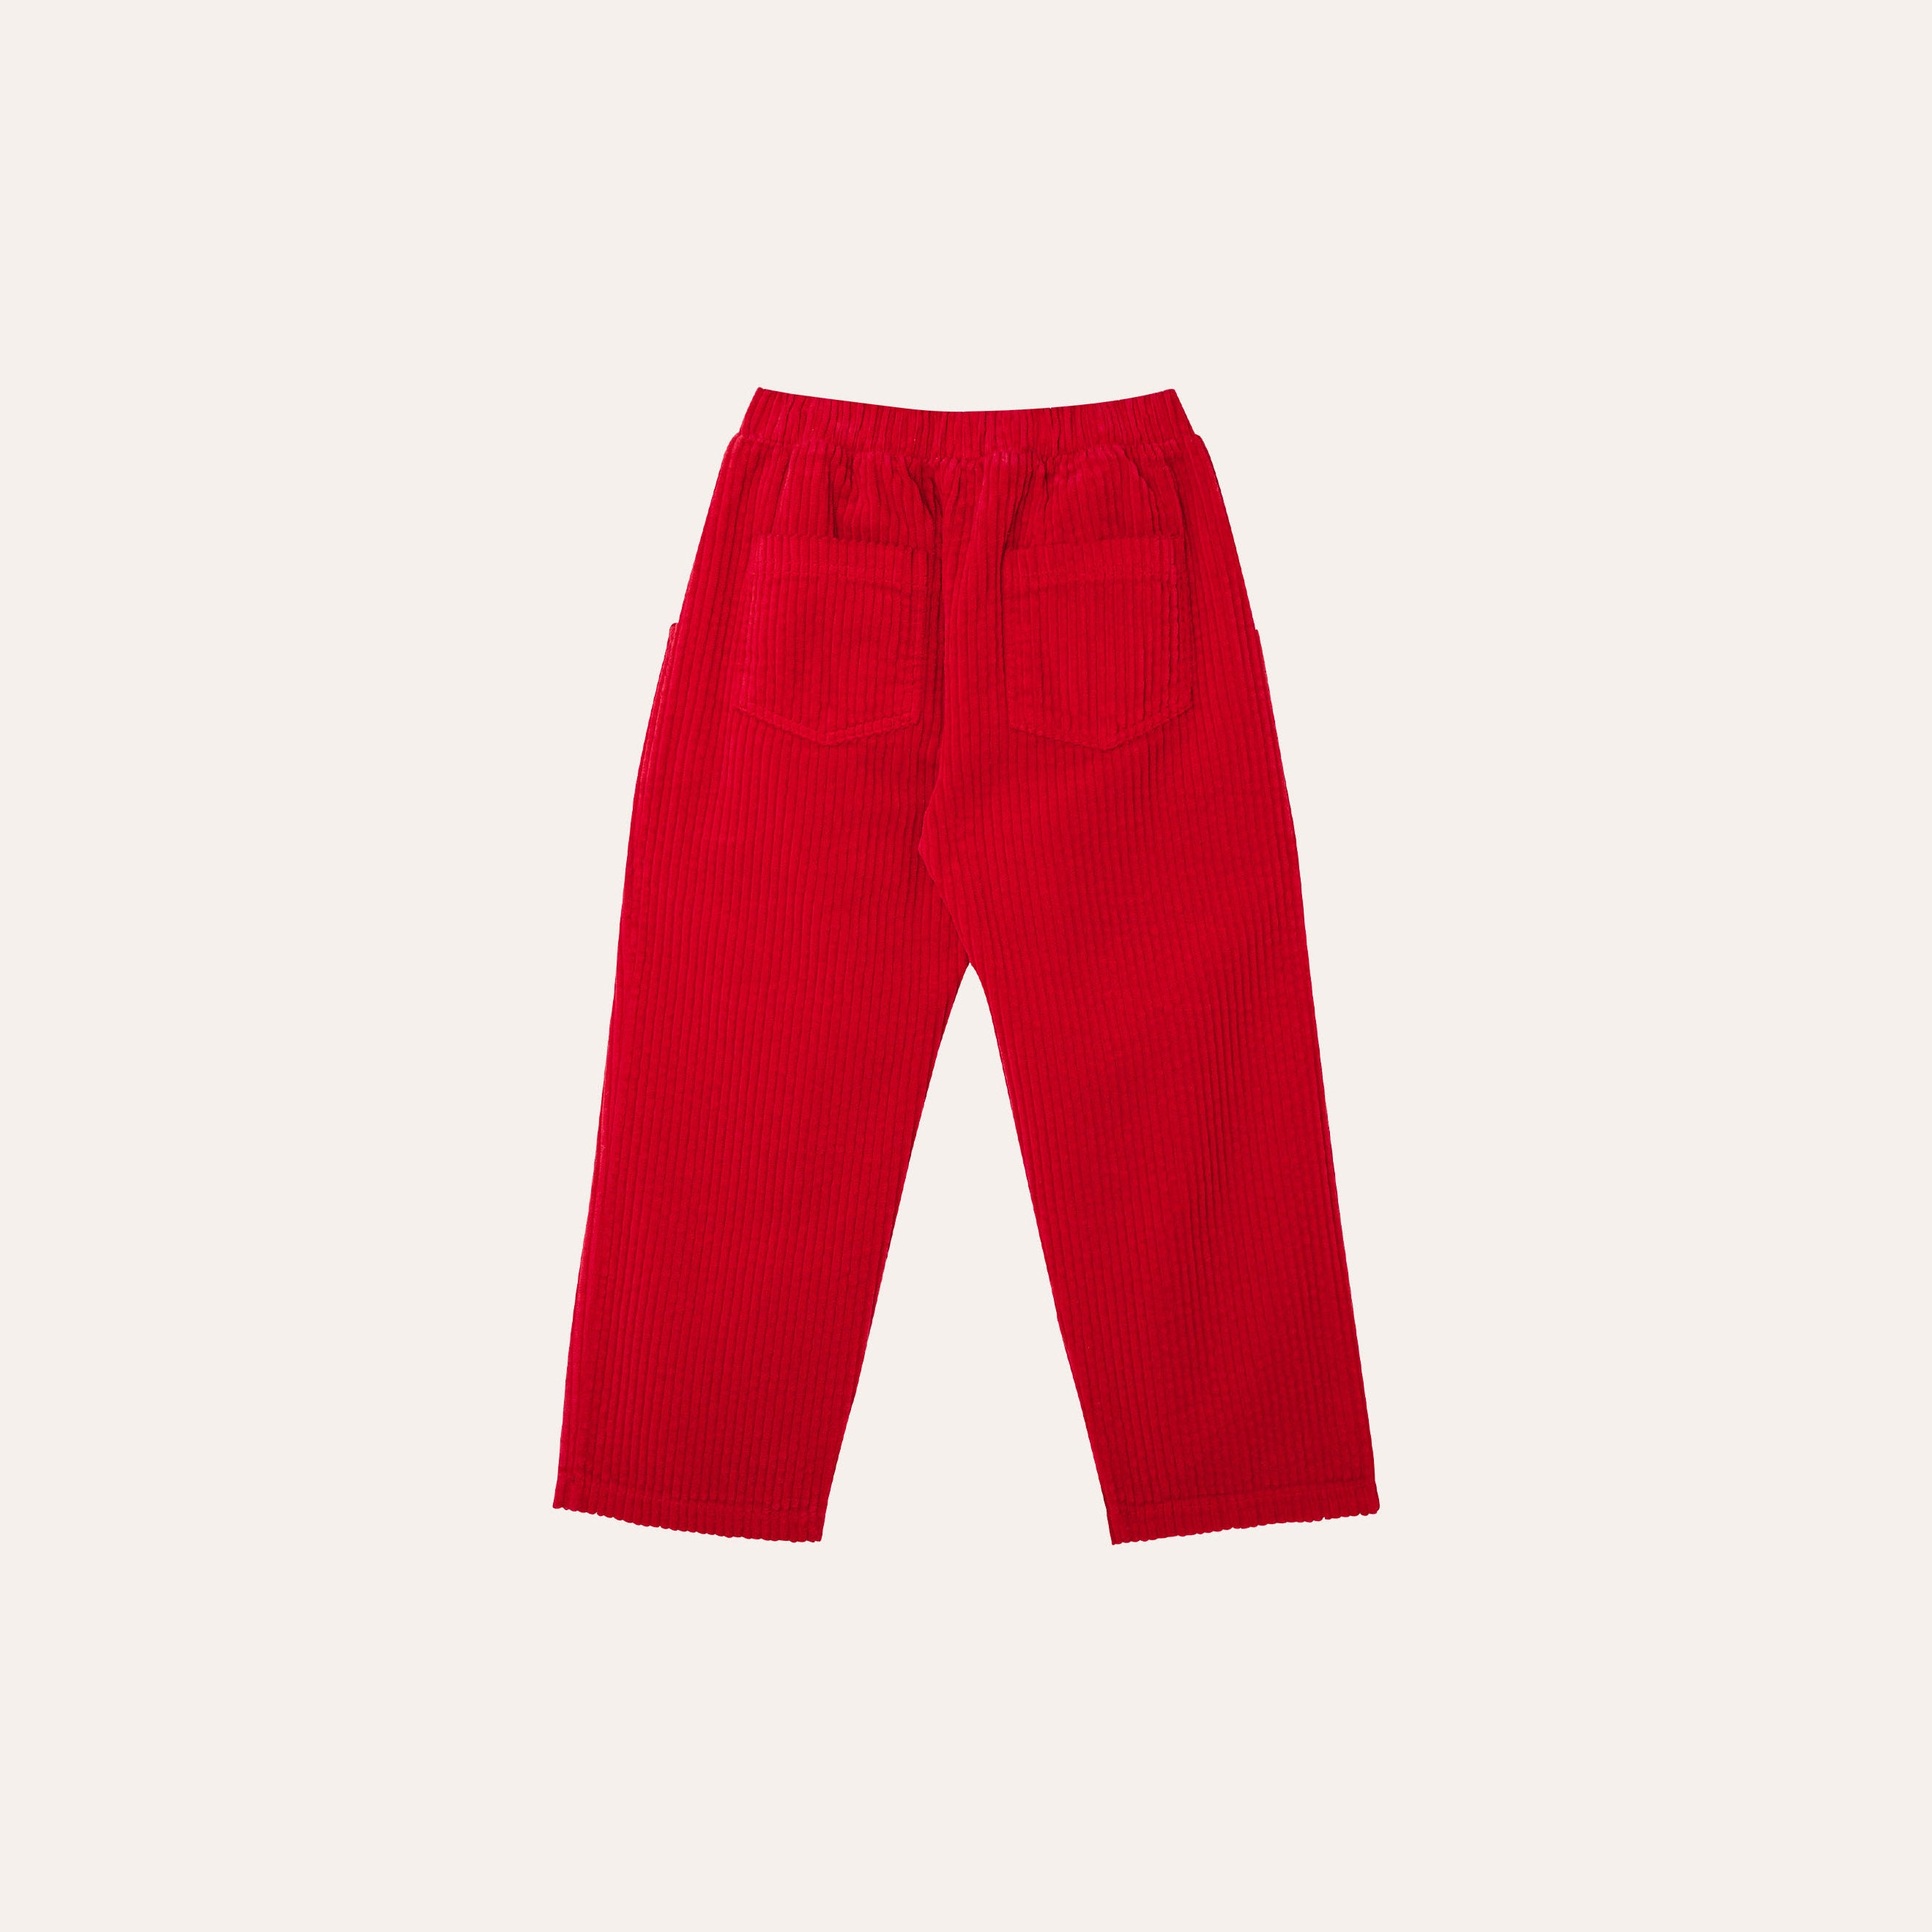 Boys & Girls Red Corduroy Trousers